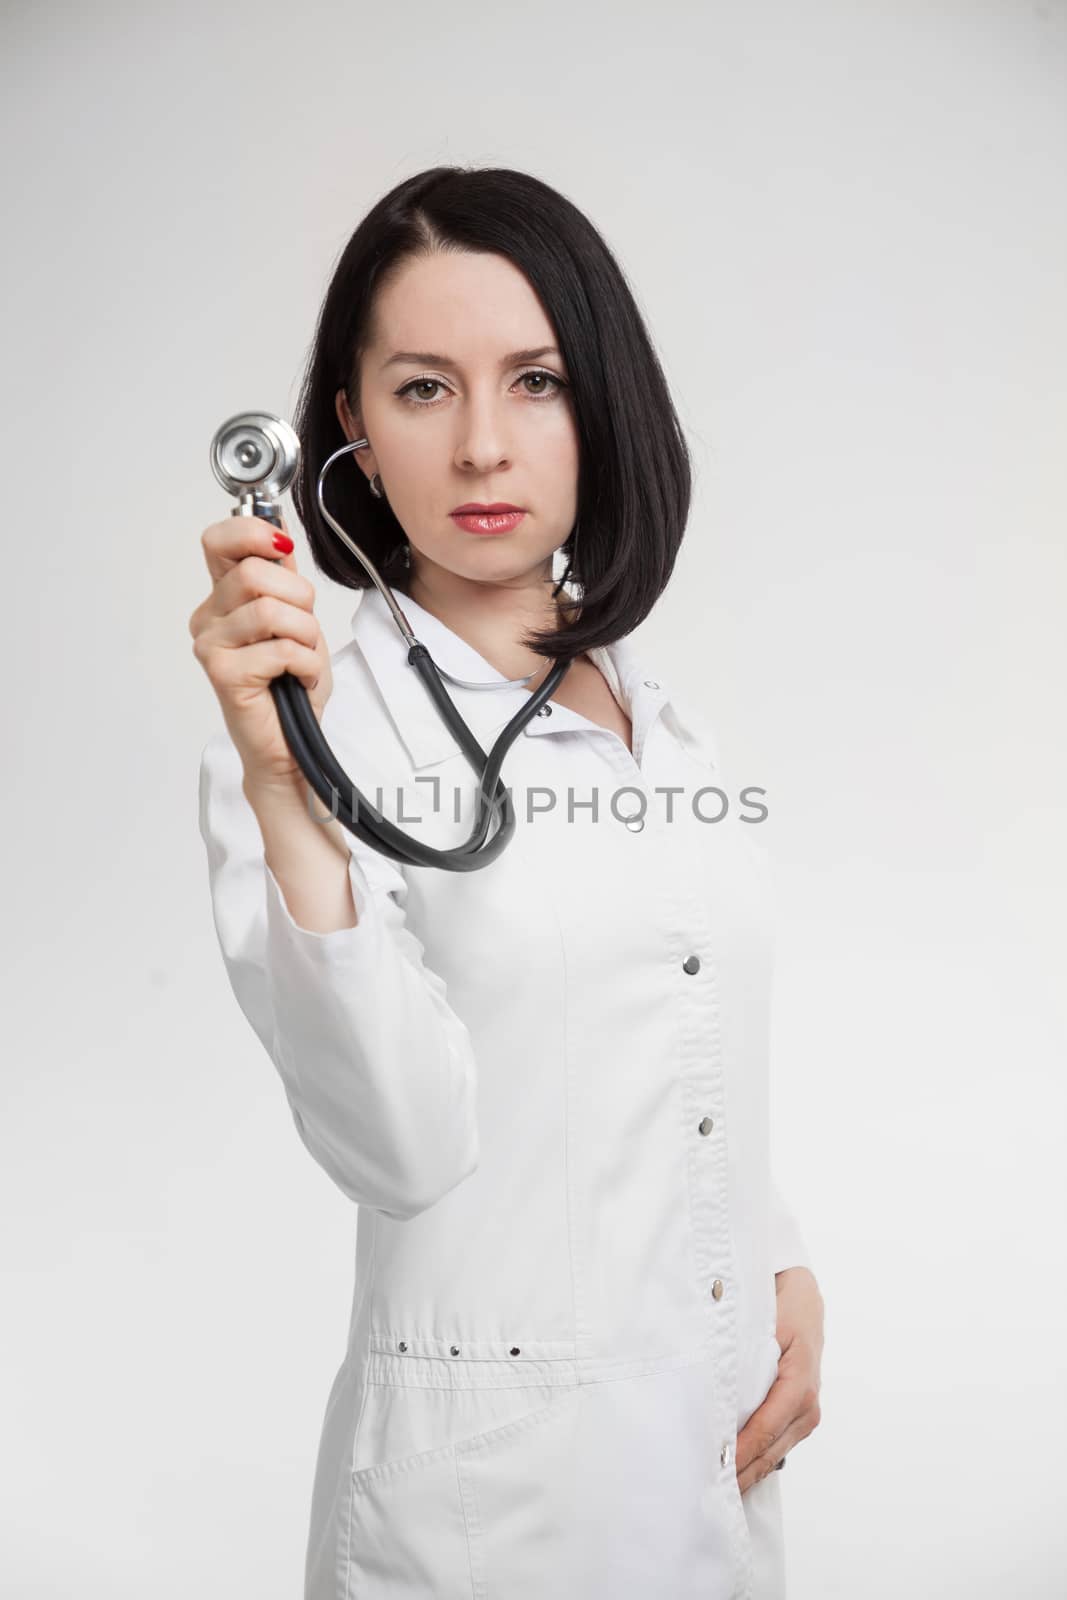 the beautiful woman the doctor with a stethoscope by sveter